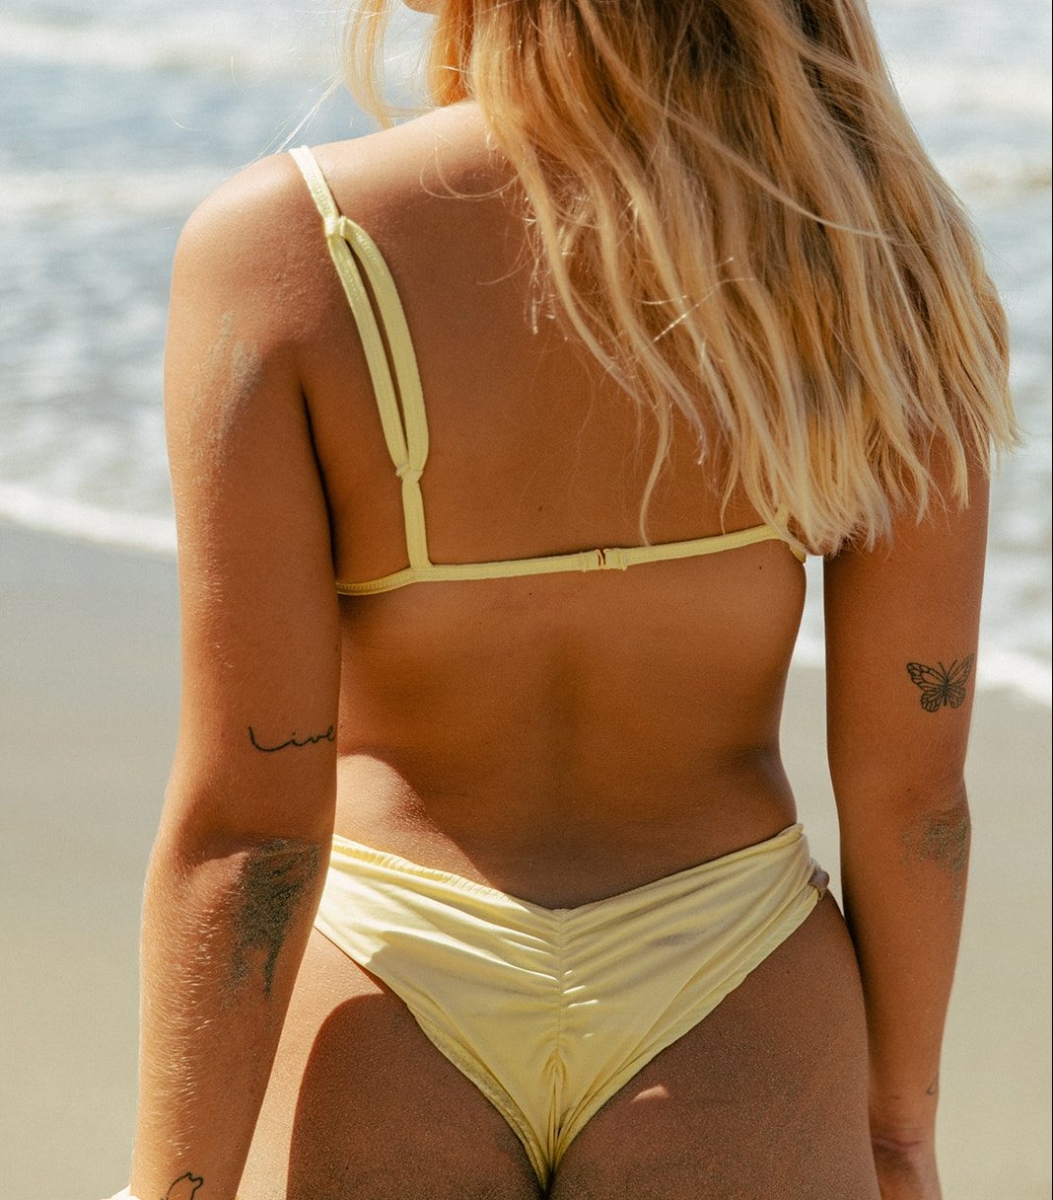 Picture of Imsy Swimwear 2121-BJU-BTR-L Justine Bottom, Butter - Large